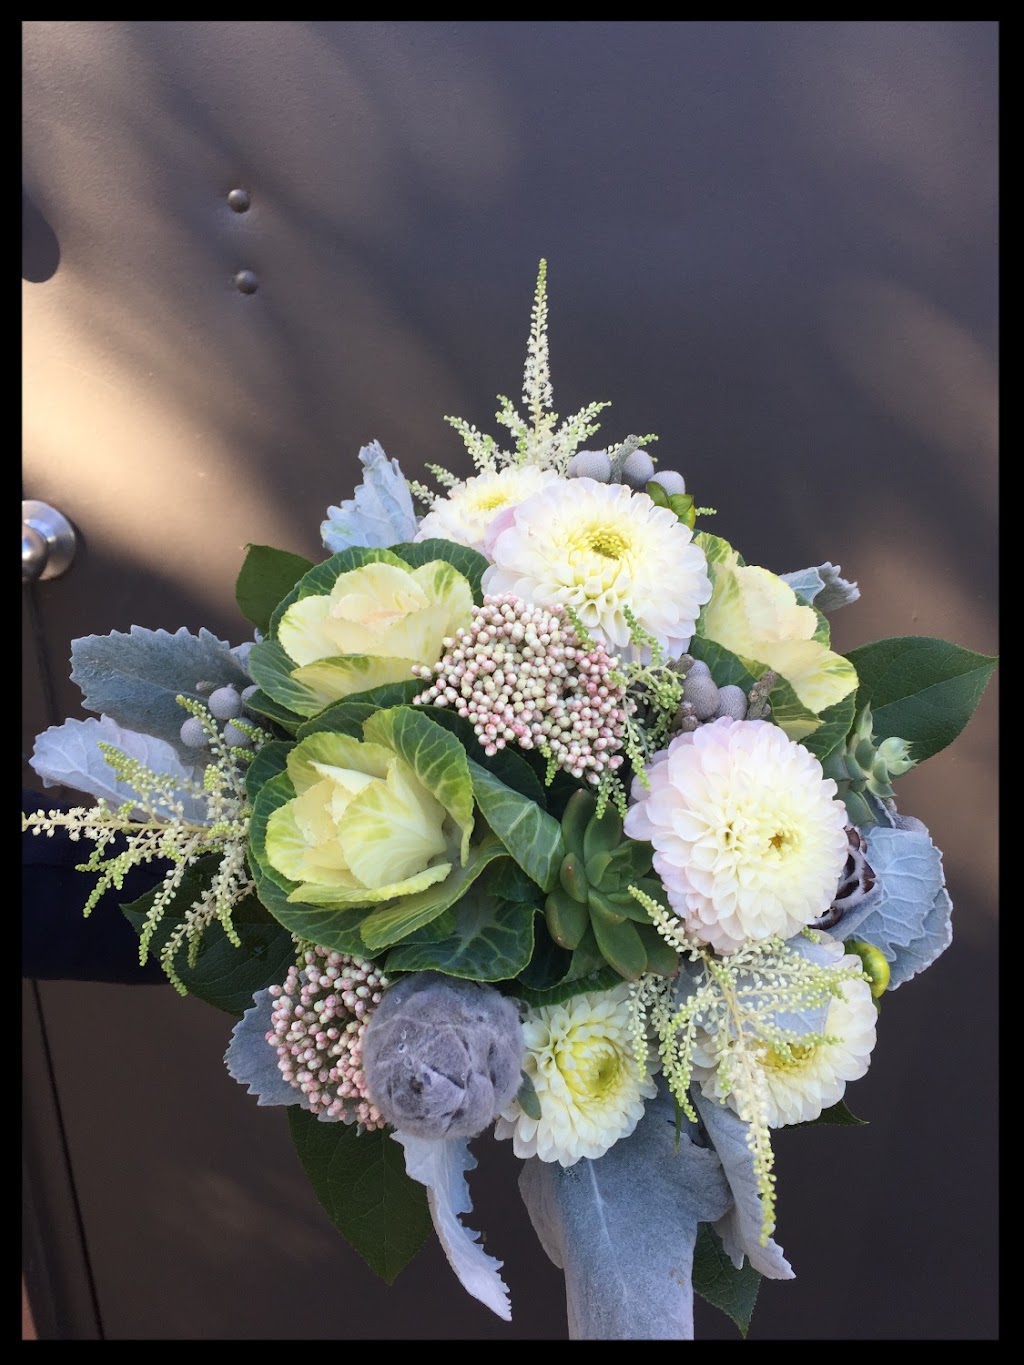 Roses and Rice Florist & Flower Delivery | 481 Montauk Hwy, East Quogue, NY 11942 | Phone: (631) 653-4910